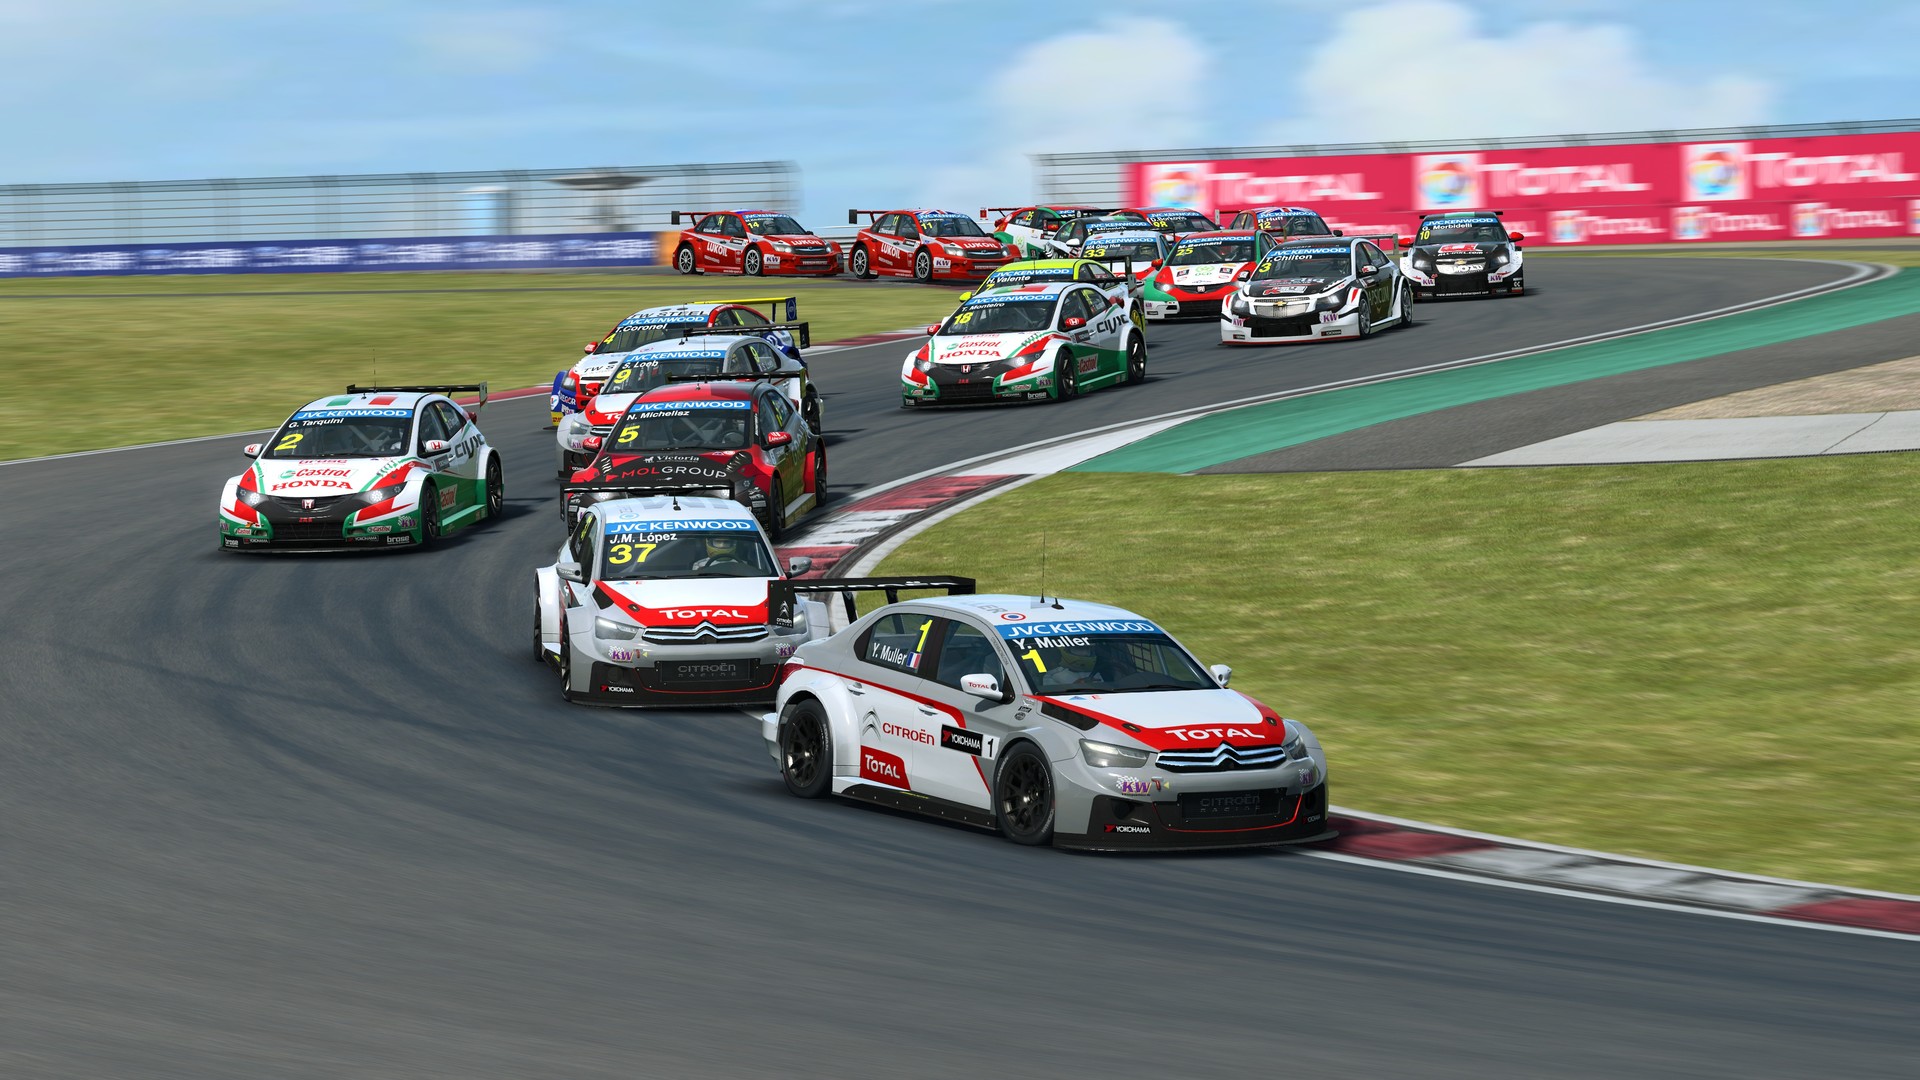 Download RaceRoom Racing Experience Full PC Game